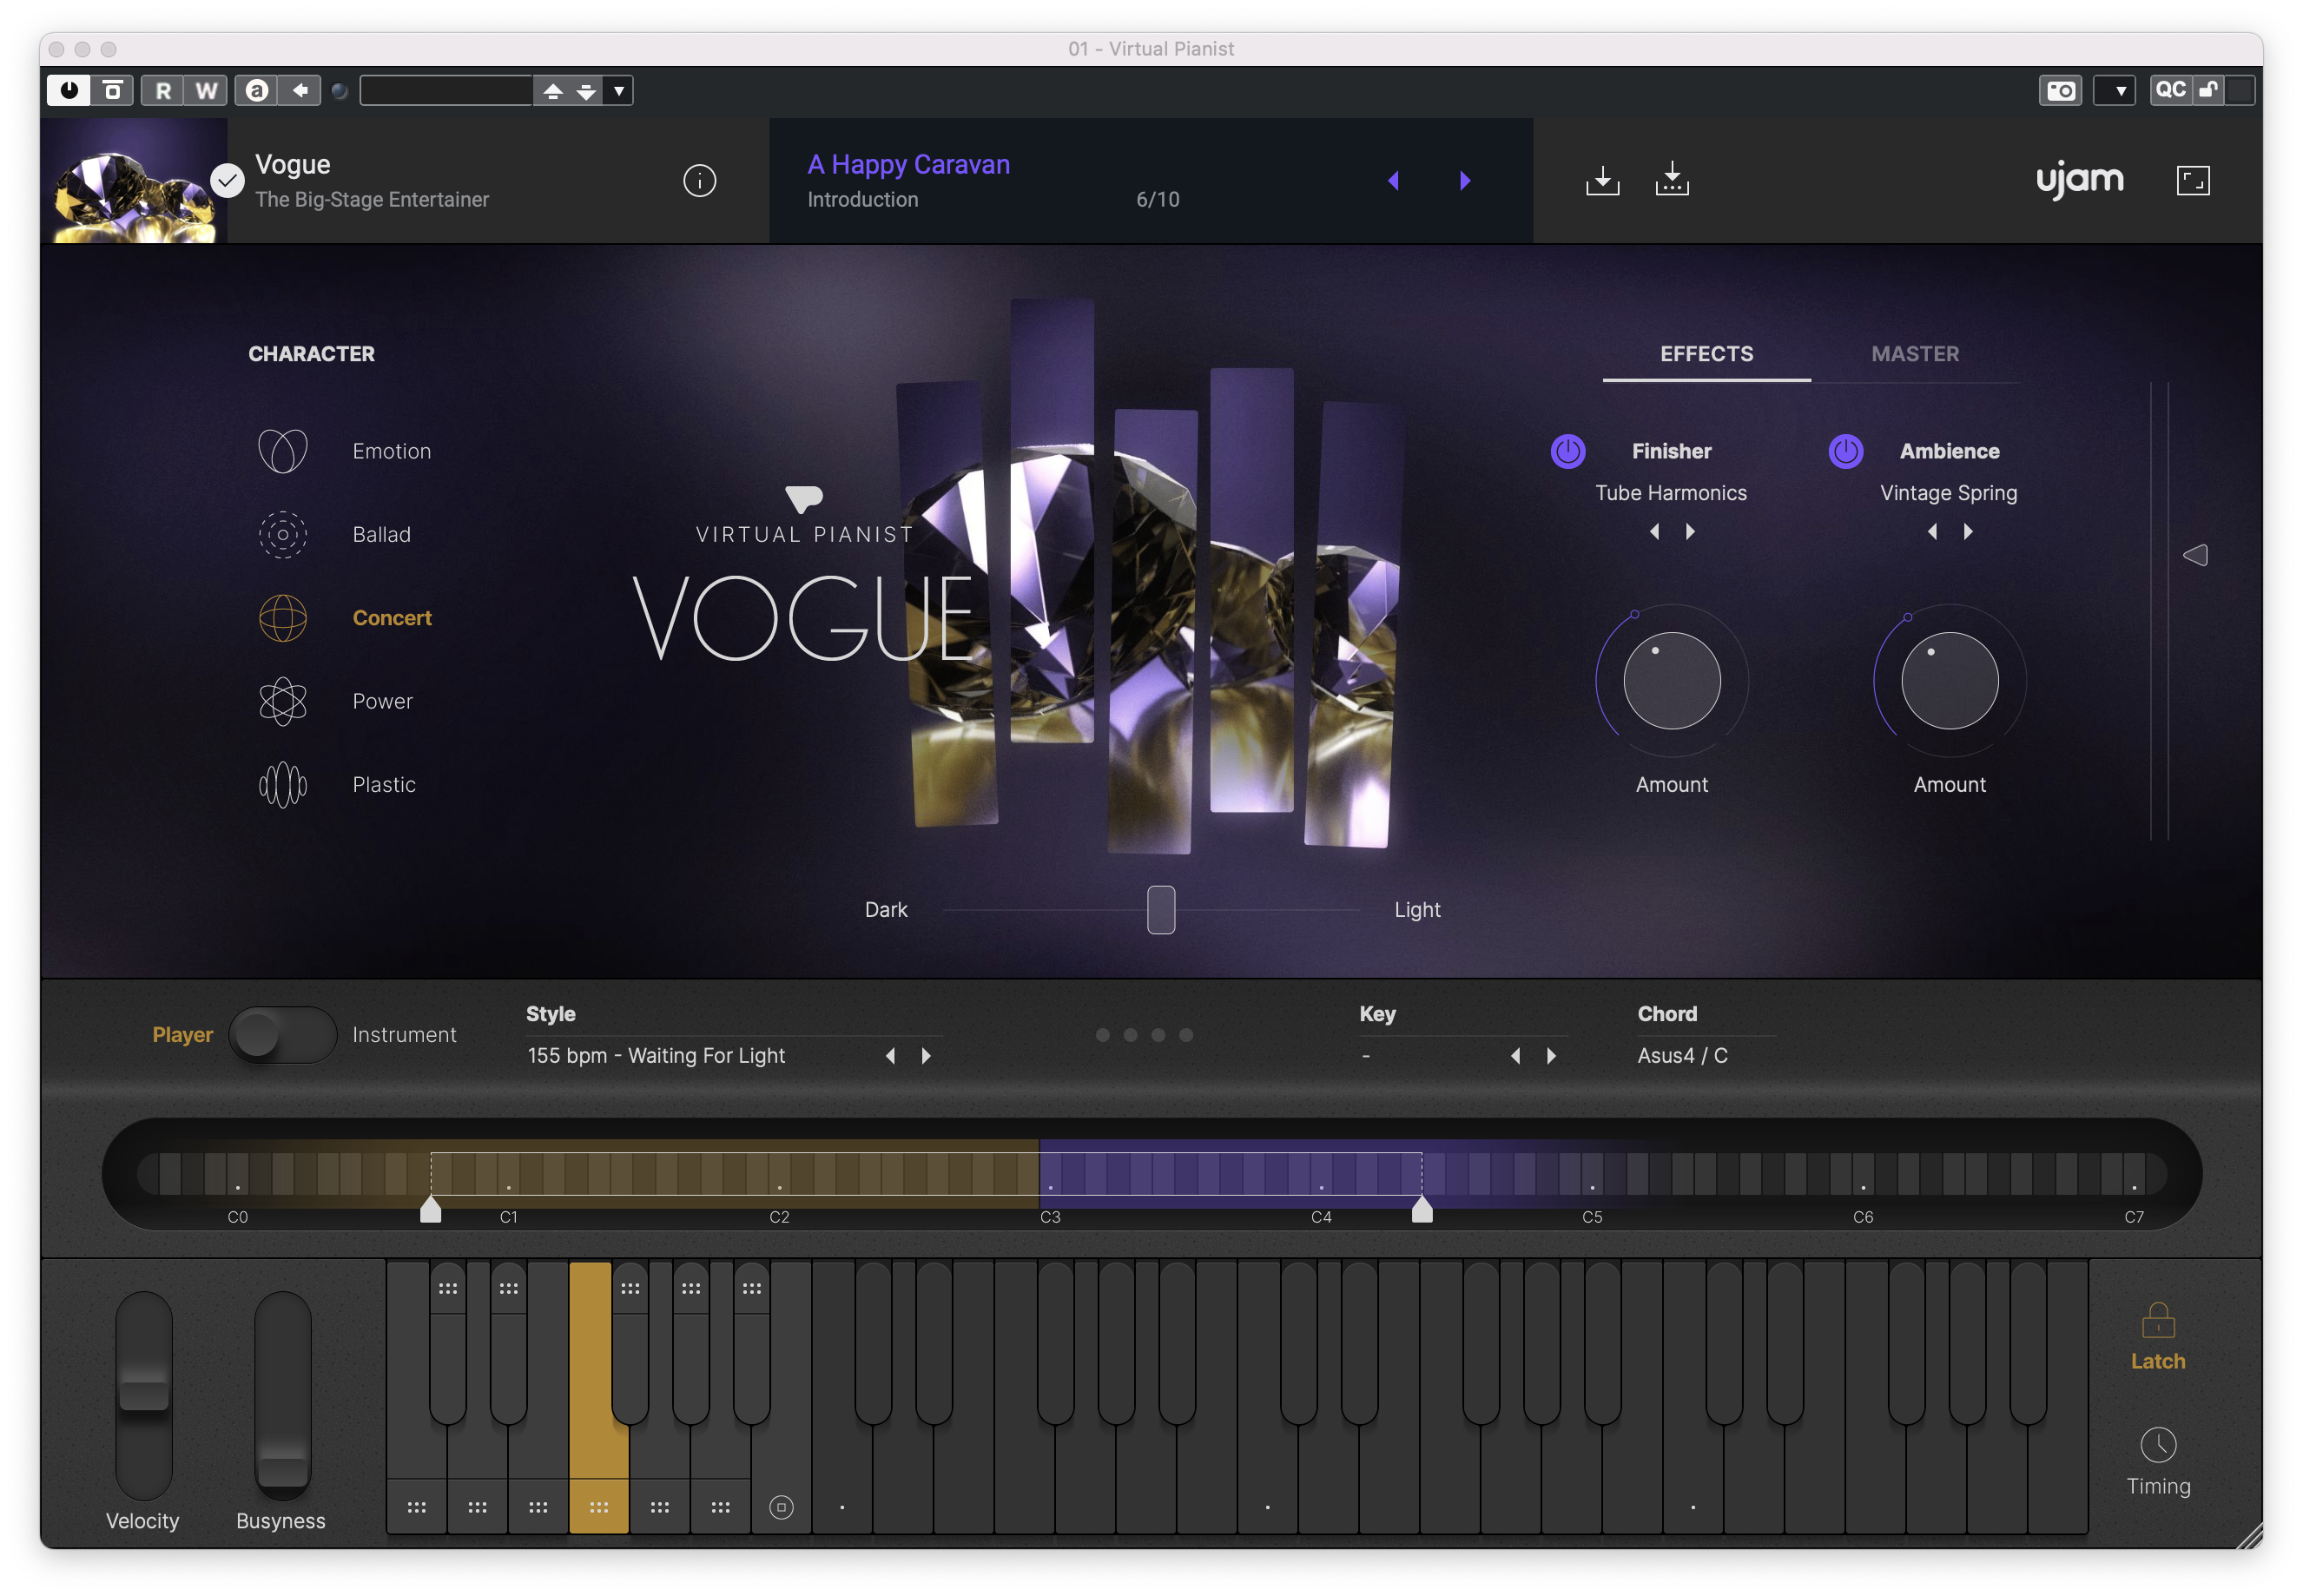 Review of UJAM Virtual Pianist VOGUE – Top Piano Phrases with Just One Finger in the DAW, The Big-Stage Entertainer for Timeless Pop Anthems